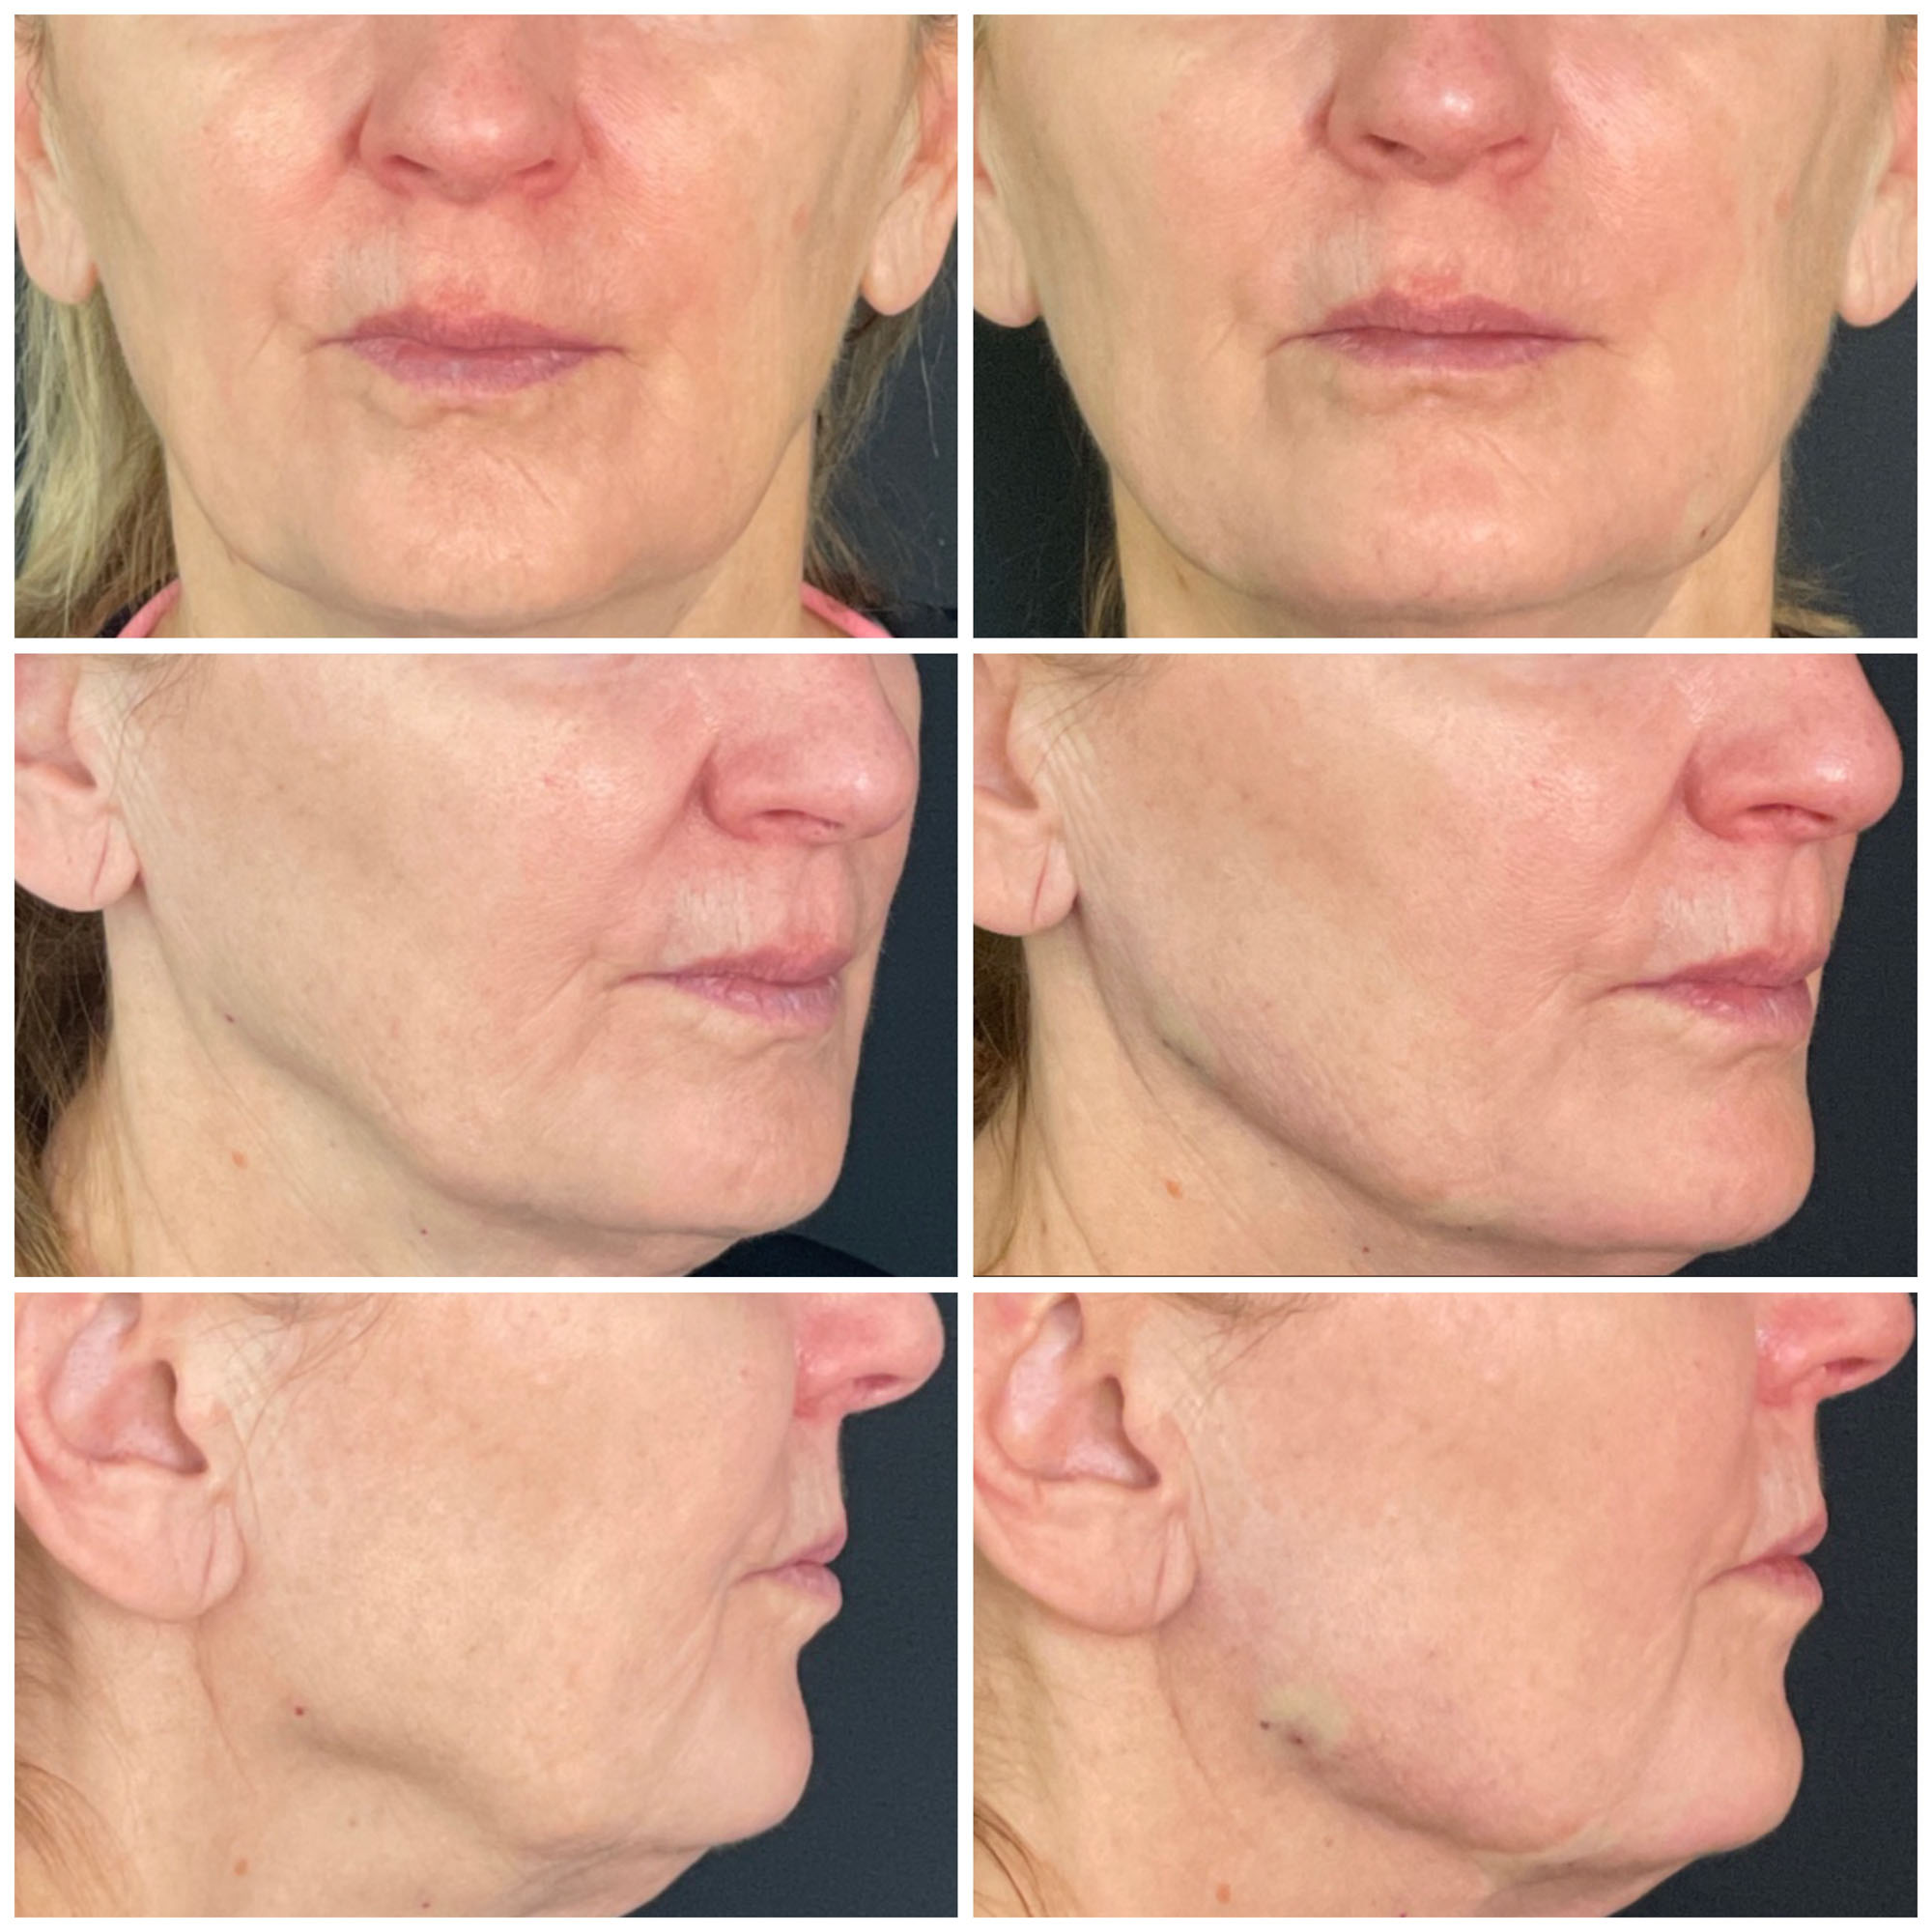 Jawline Contouring Filler Before and After images from Refresh Aesthetic Center in Whitefish Bay WI